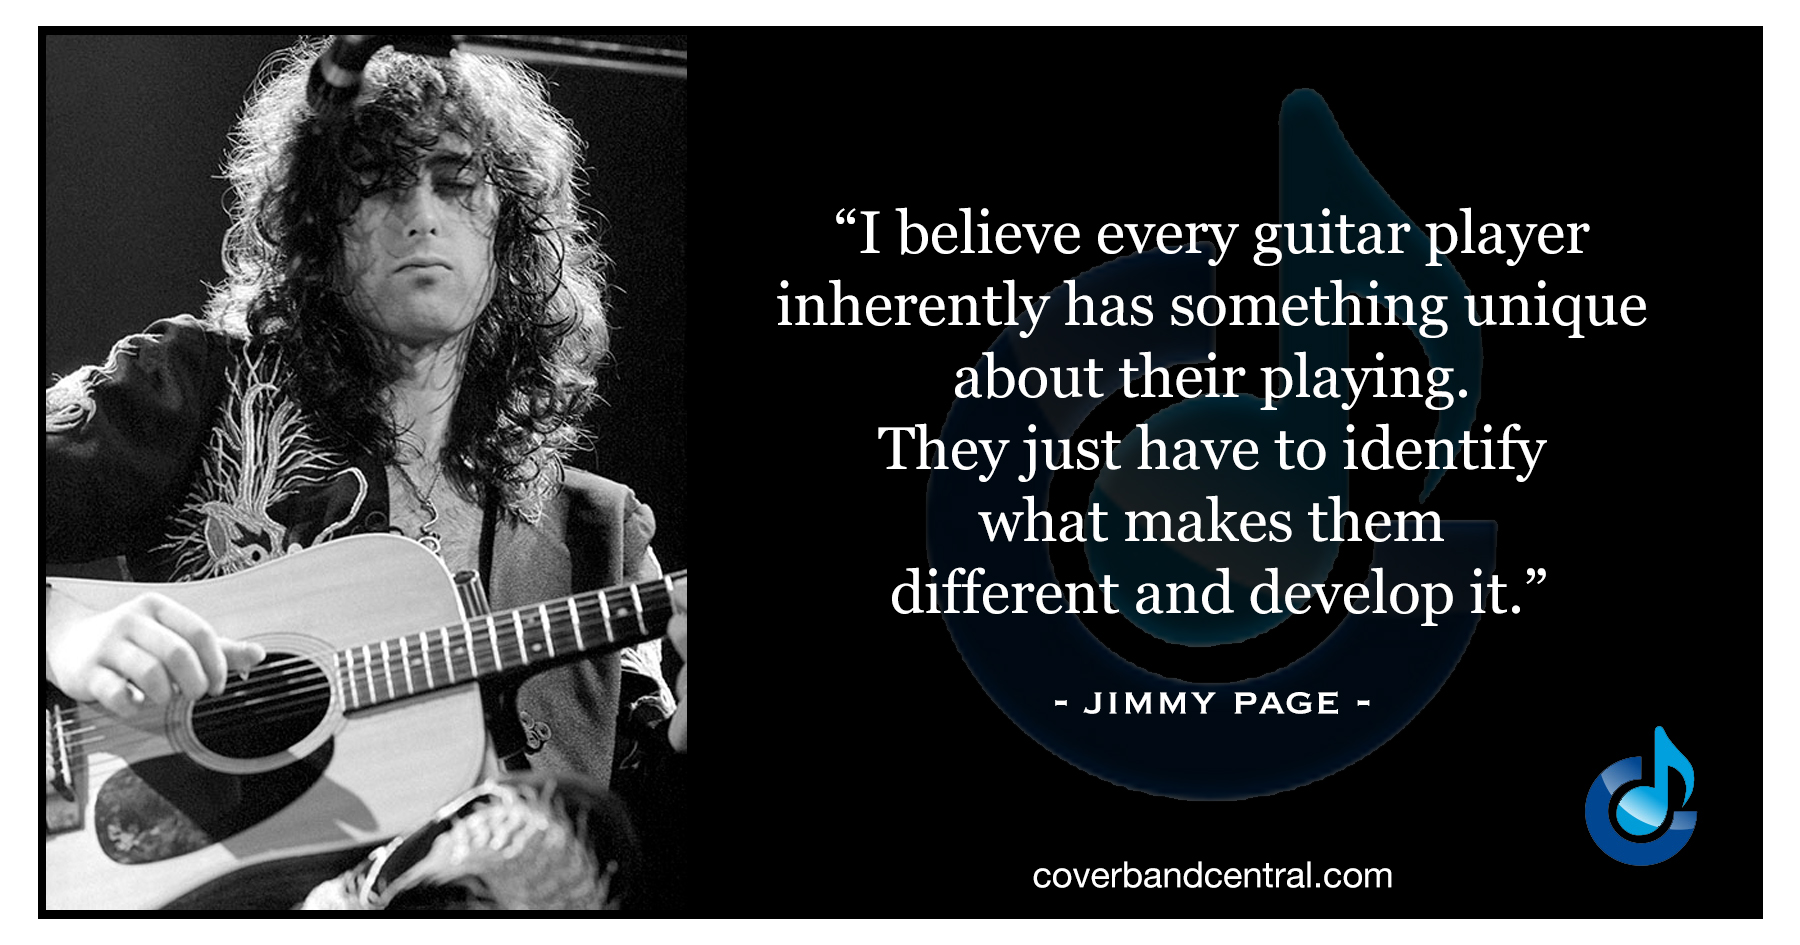 Jimmy Page quote